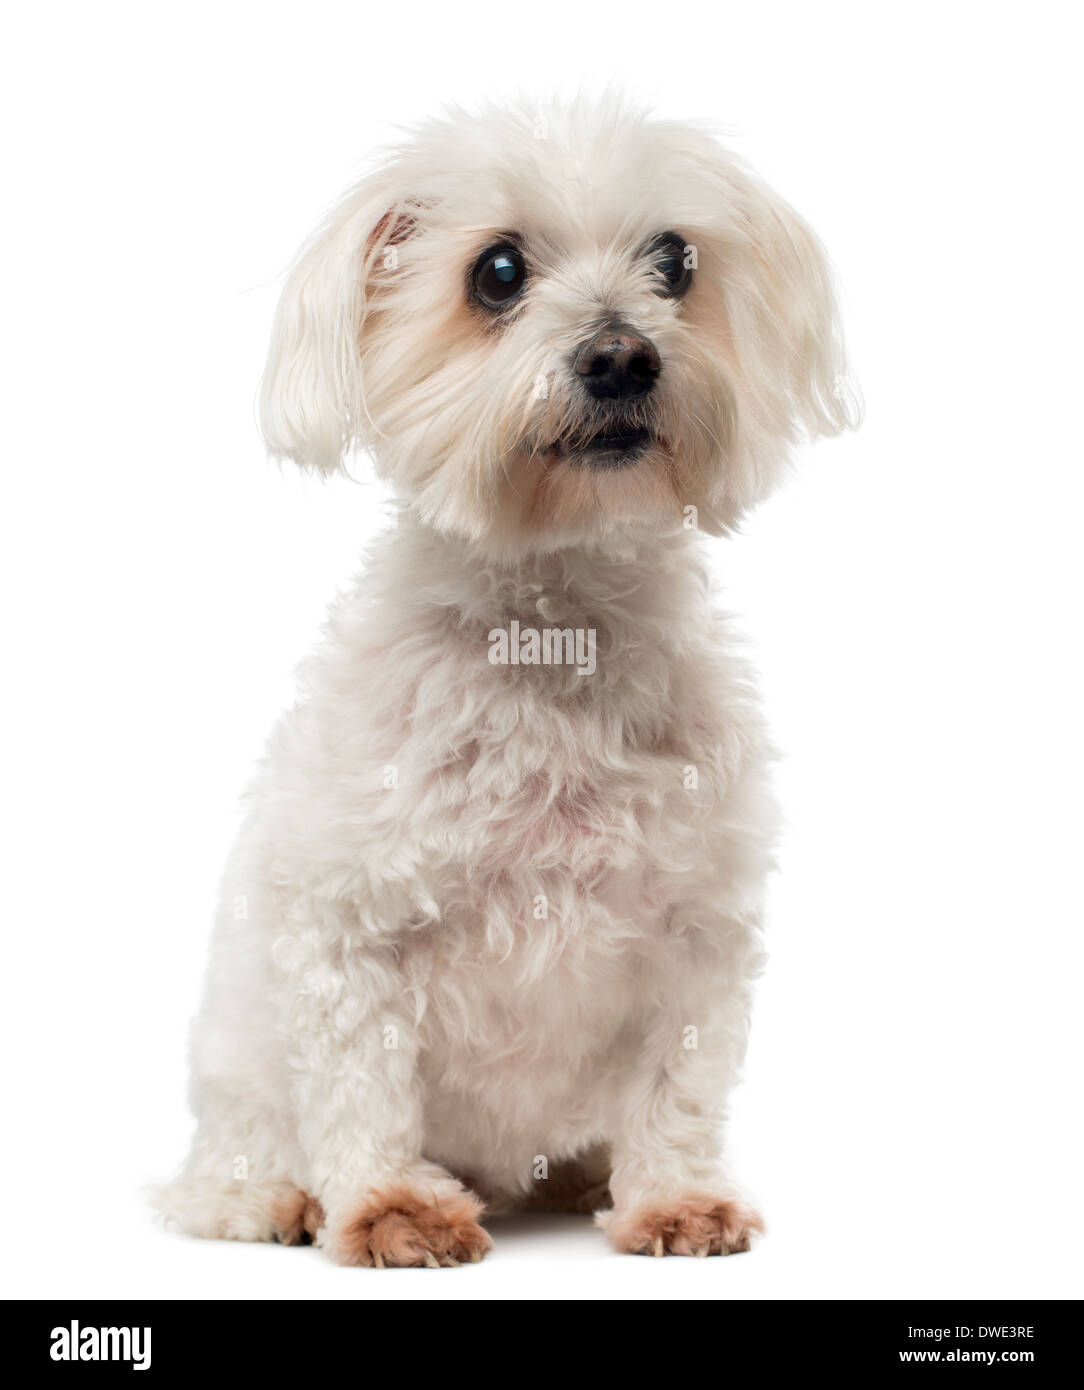 Old Maltese dog with cataract, sitting, looking away, 15 years old, against white background Stock Photo